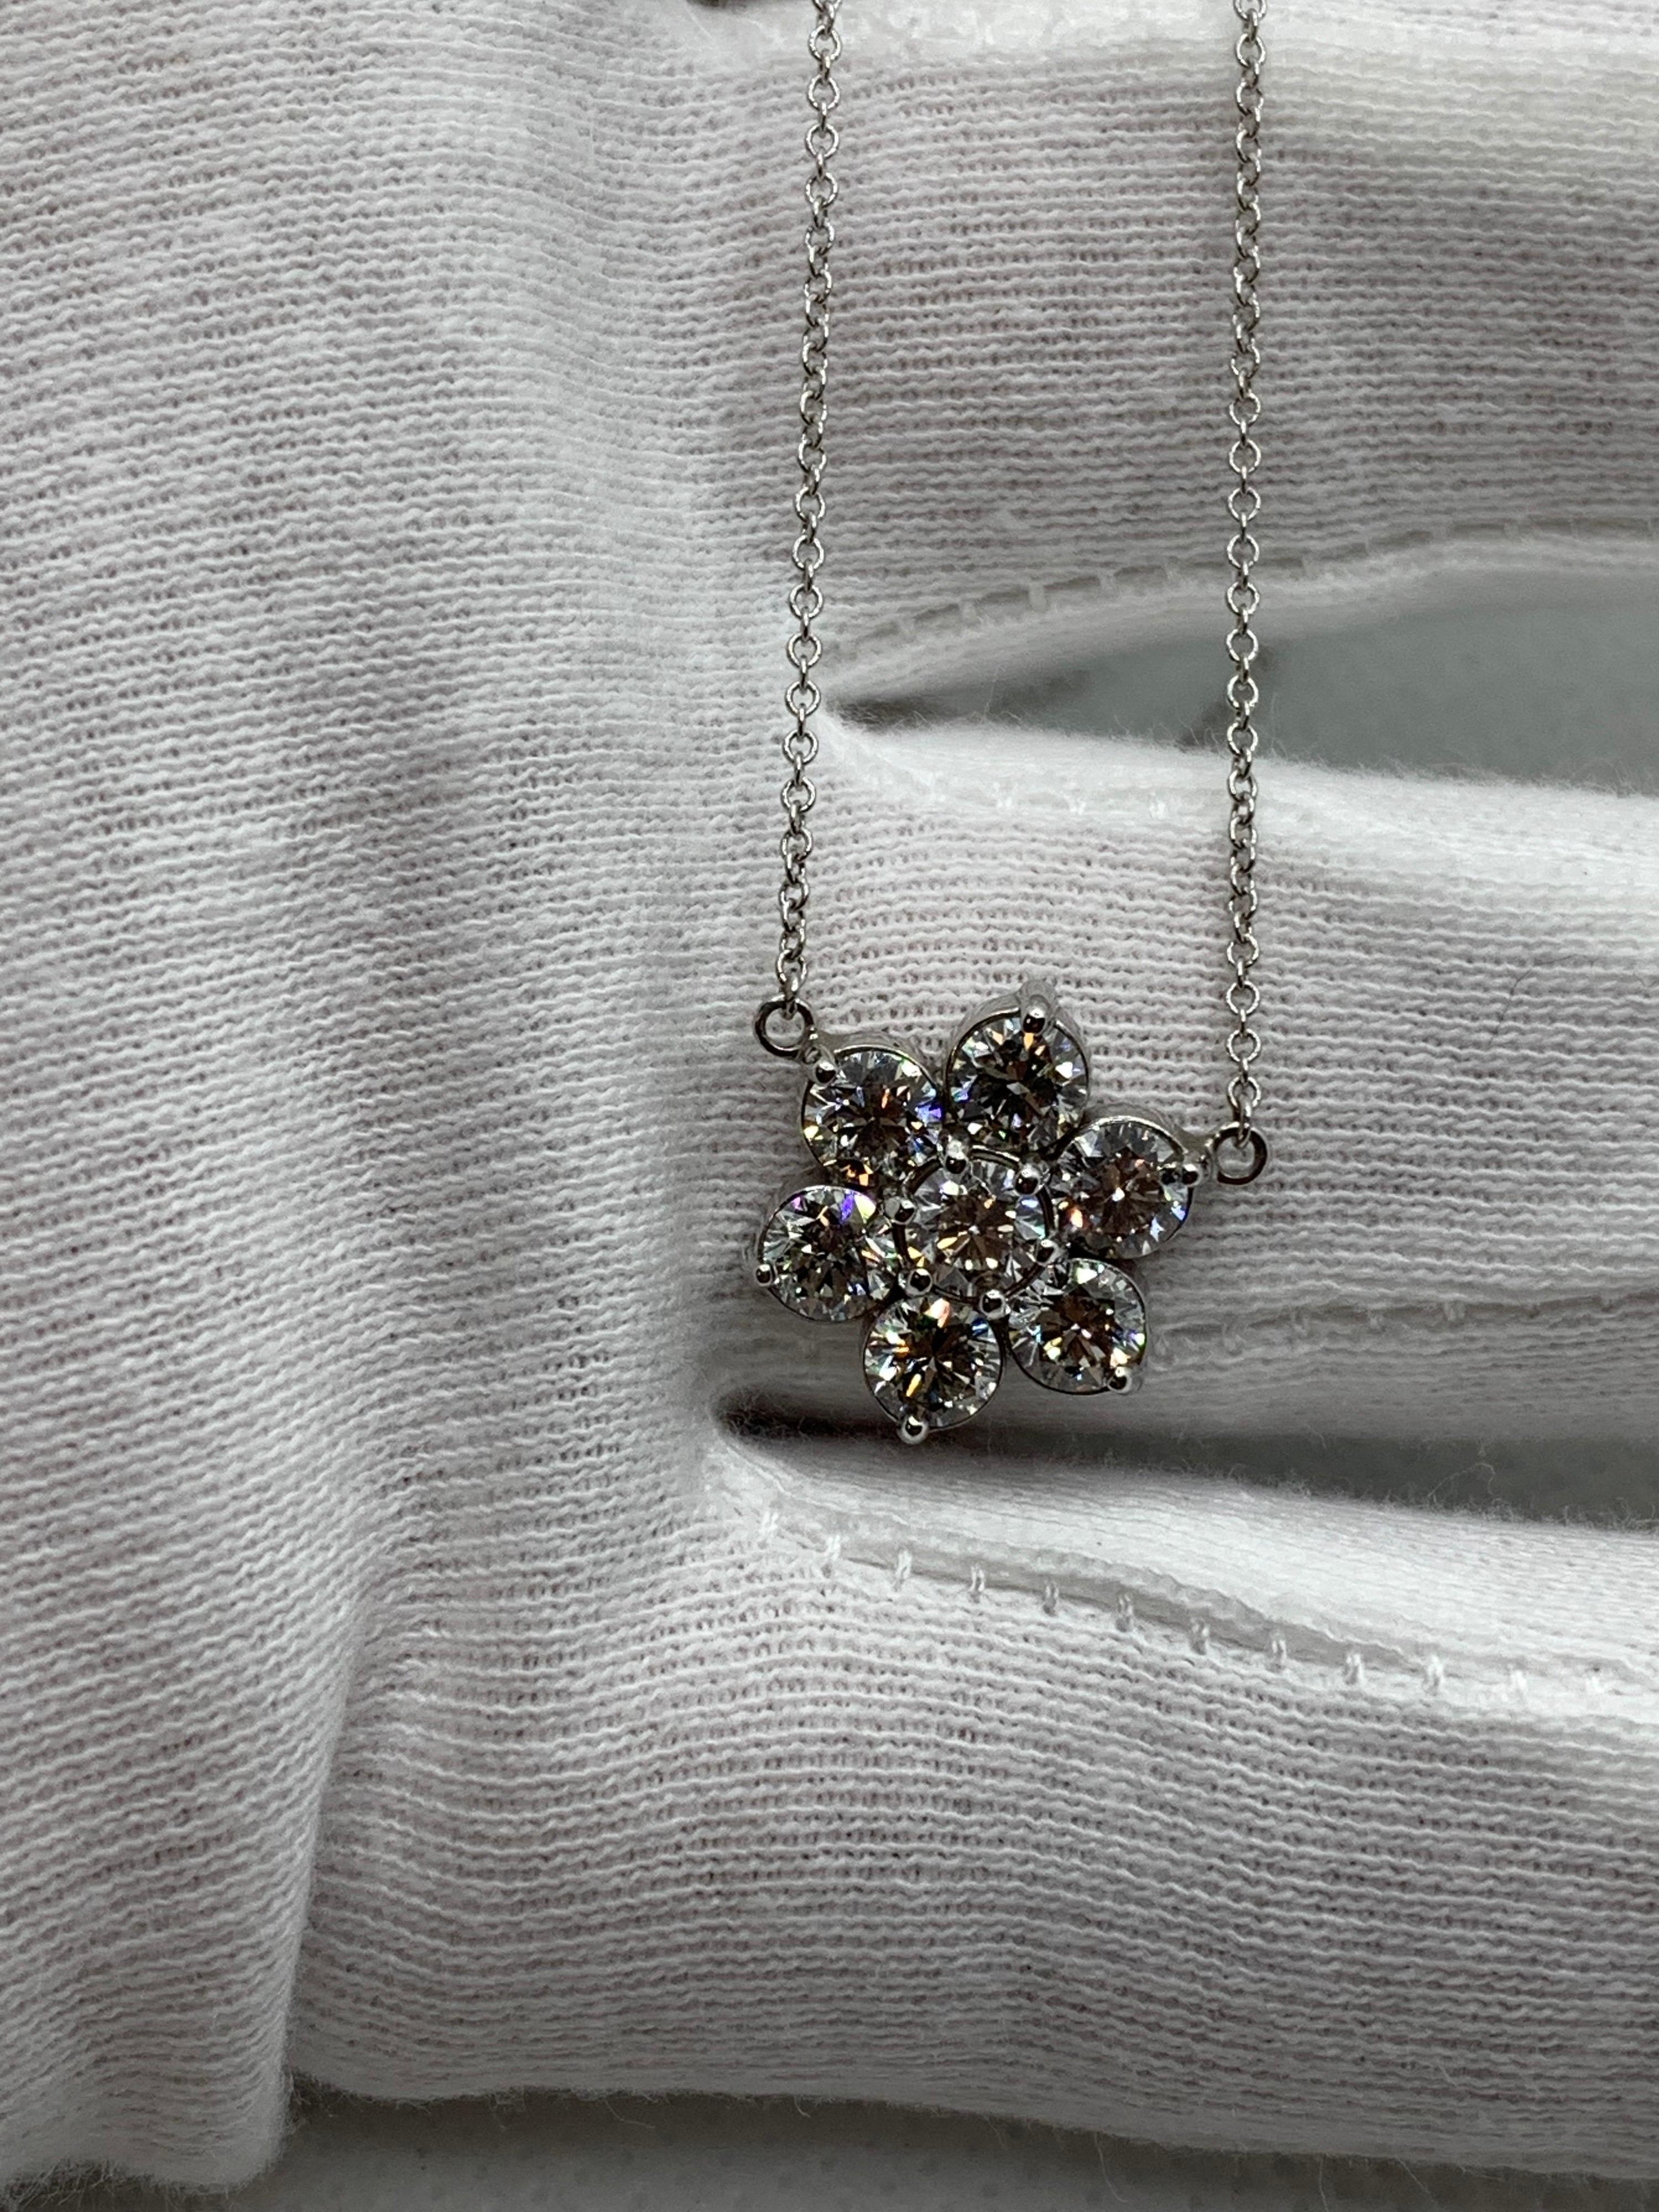 7 Round Brilliant Diamonds come together to form a beautiful Flower Cluster. Laying low and effortless on the neck, this pendant goes with anything and can be worn anywhere. 

1.75 Carats. Each Stone weighs 0.25 Carat. Set in 14 Karat White Gold.